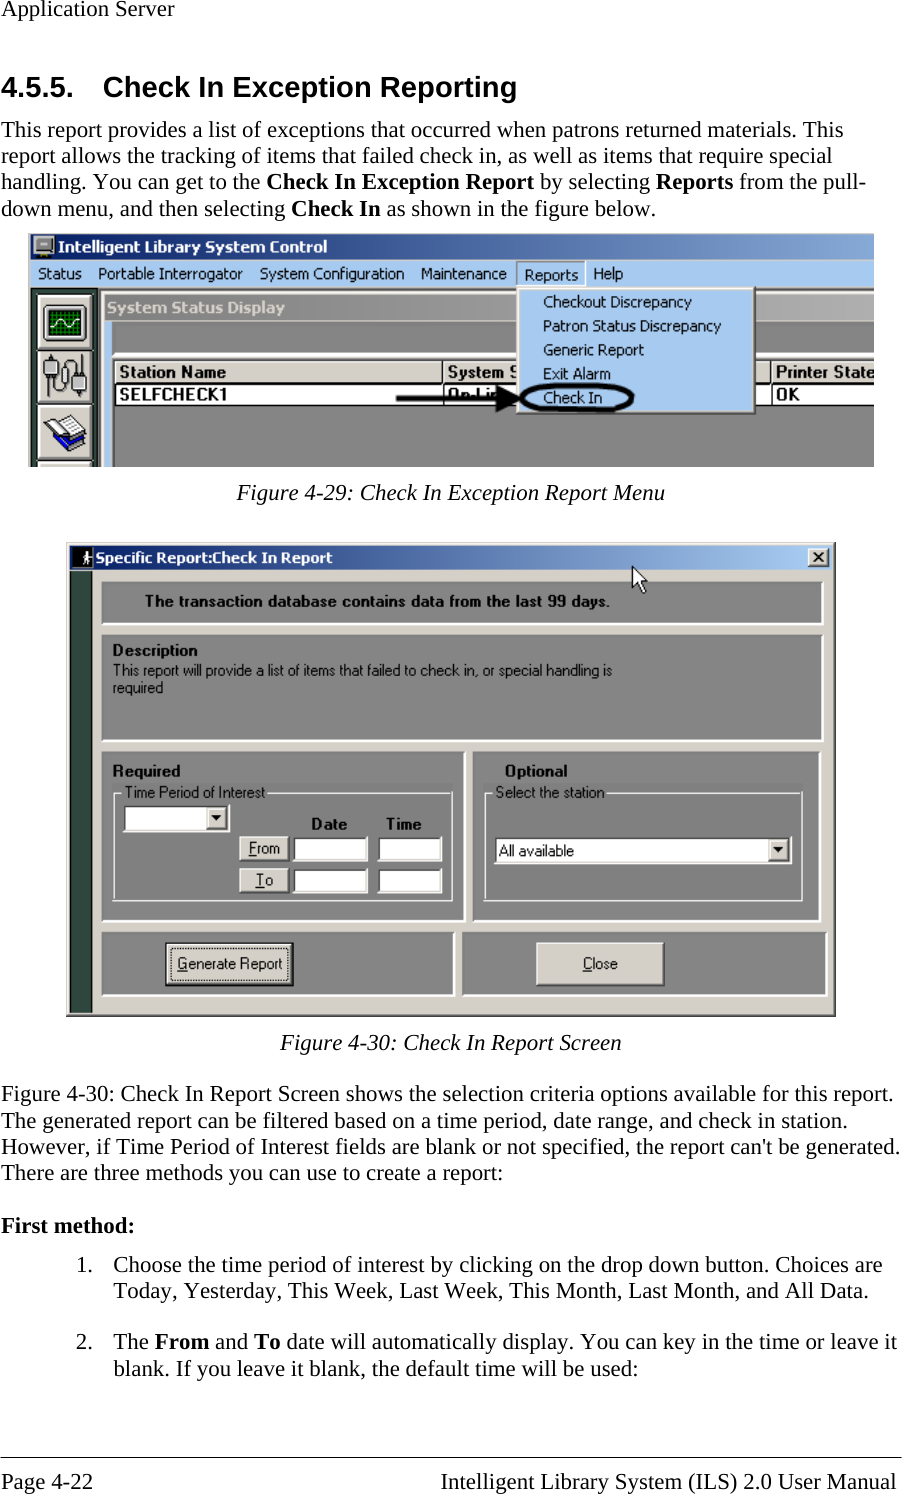 Application Server 4.5.5.   Check In Exception Reporting This report provides a list of exceptions that occurred when patrons returned materials. This report allows the tracking of items that failed check in, as well as items that require special handling. You can get to the Check In Exception Report by selecting Reports from the pull-down menu, and then selecting Check In as shown in the figure below.   Figure 4-29: Check In Exception Report Menu  Figure 4-30: Check In Report Screen Figure 4-30: Check In Report Screen shows the selection criteria options available for this report. The generated report can be filtered based on a time period, date range, and check in station. However, if Time Period of Interest fields are blank or not specified, the report can&apos;t be generated. There are three methods you can use to create a report:  First method: 1.  Choose the time period of interest by clicking on the drop down button. Choices are Today, Yesterday, This Week, Last Week, This Month, Last Month, and All Data. 2. The From and To date will automatically display. You can key in the time or leave it blank. If you leave it blank, the default time will be used:       Page 4-22                                                       Intelligent Library System (ILS) 2.0 User Manual 